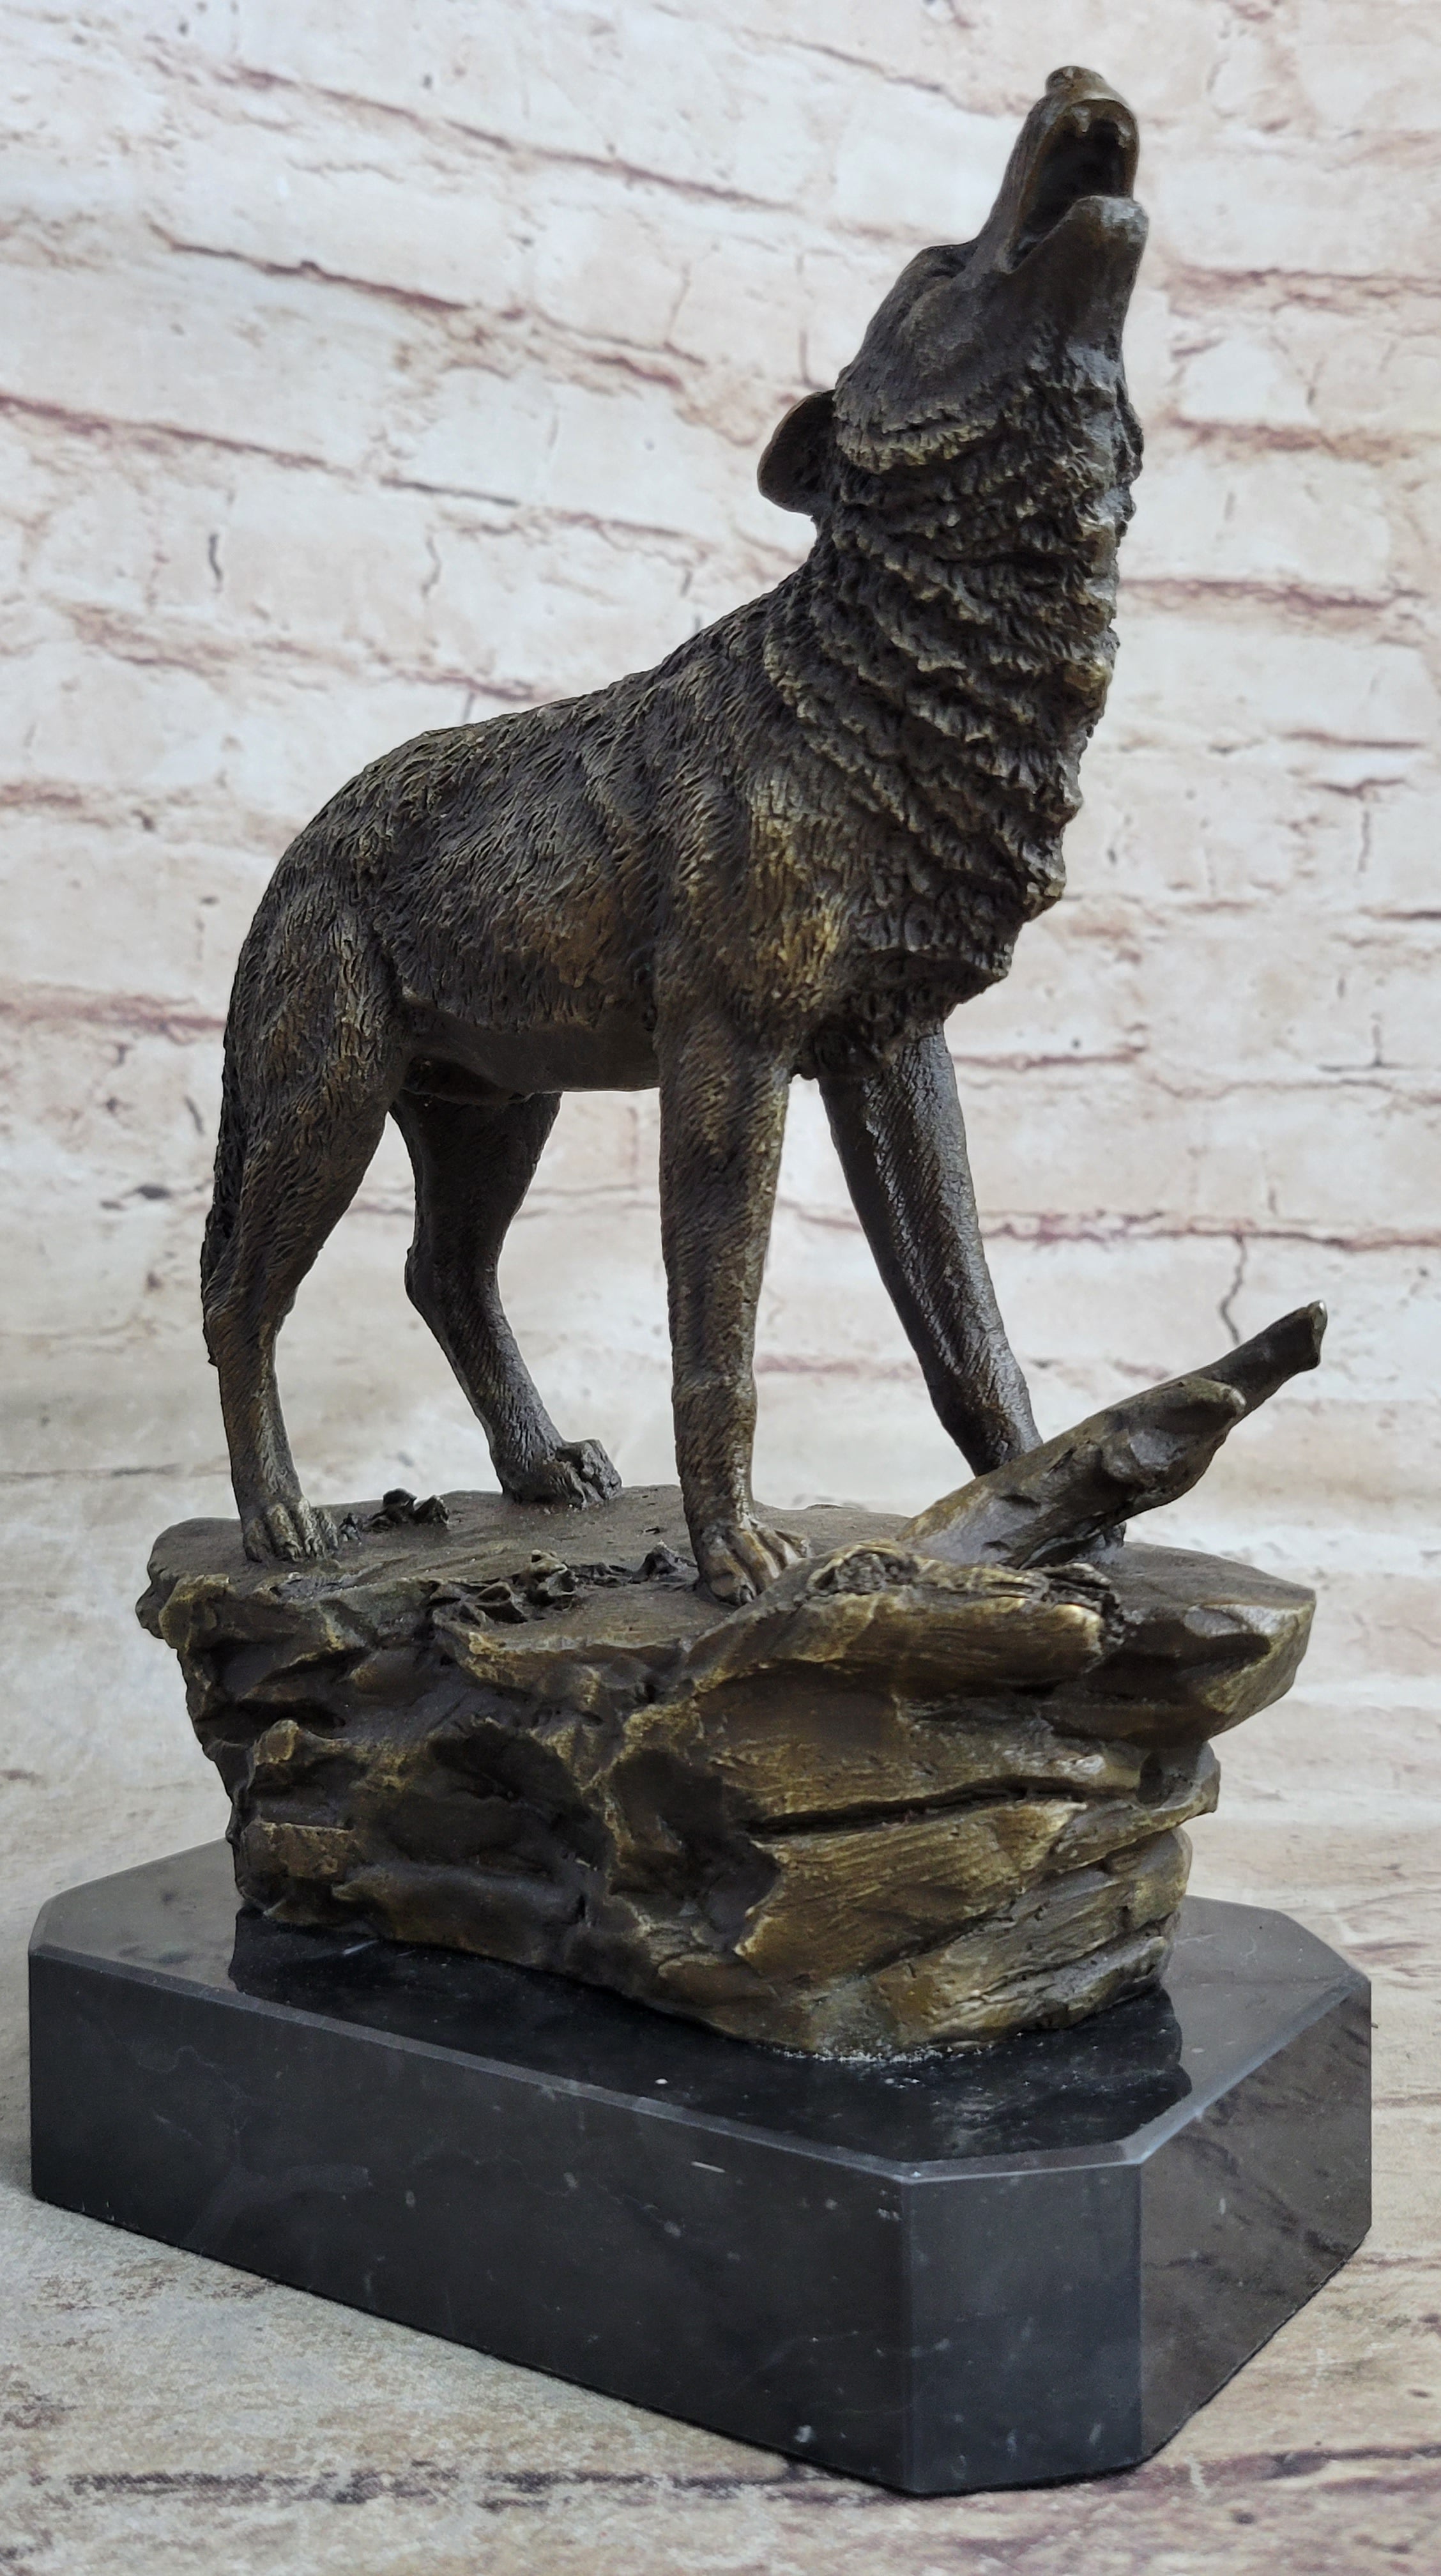 Marble　Bronze　Art　Howling　Statue-　Signed　to　The　Moon　Original　Base　Wolf　Sculpture